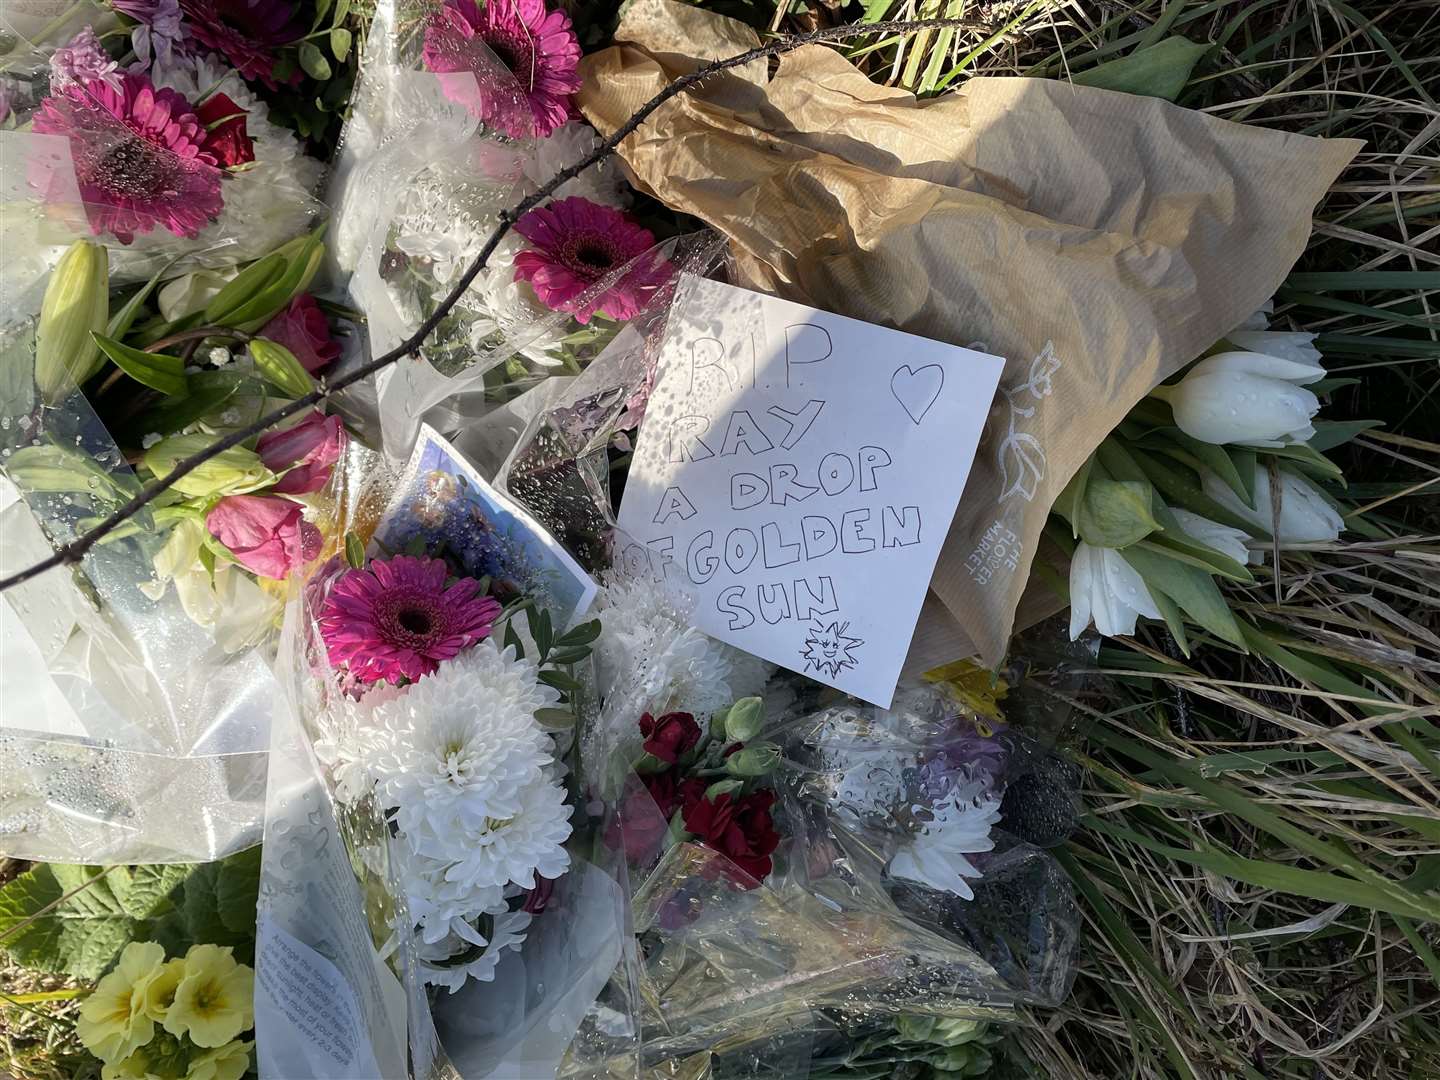 'R.I.P Ray, a drop of golden sun' is among the tributes left to Ray Hooker on the roadside